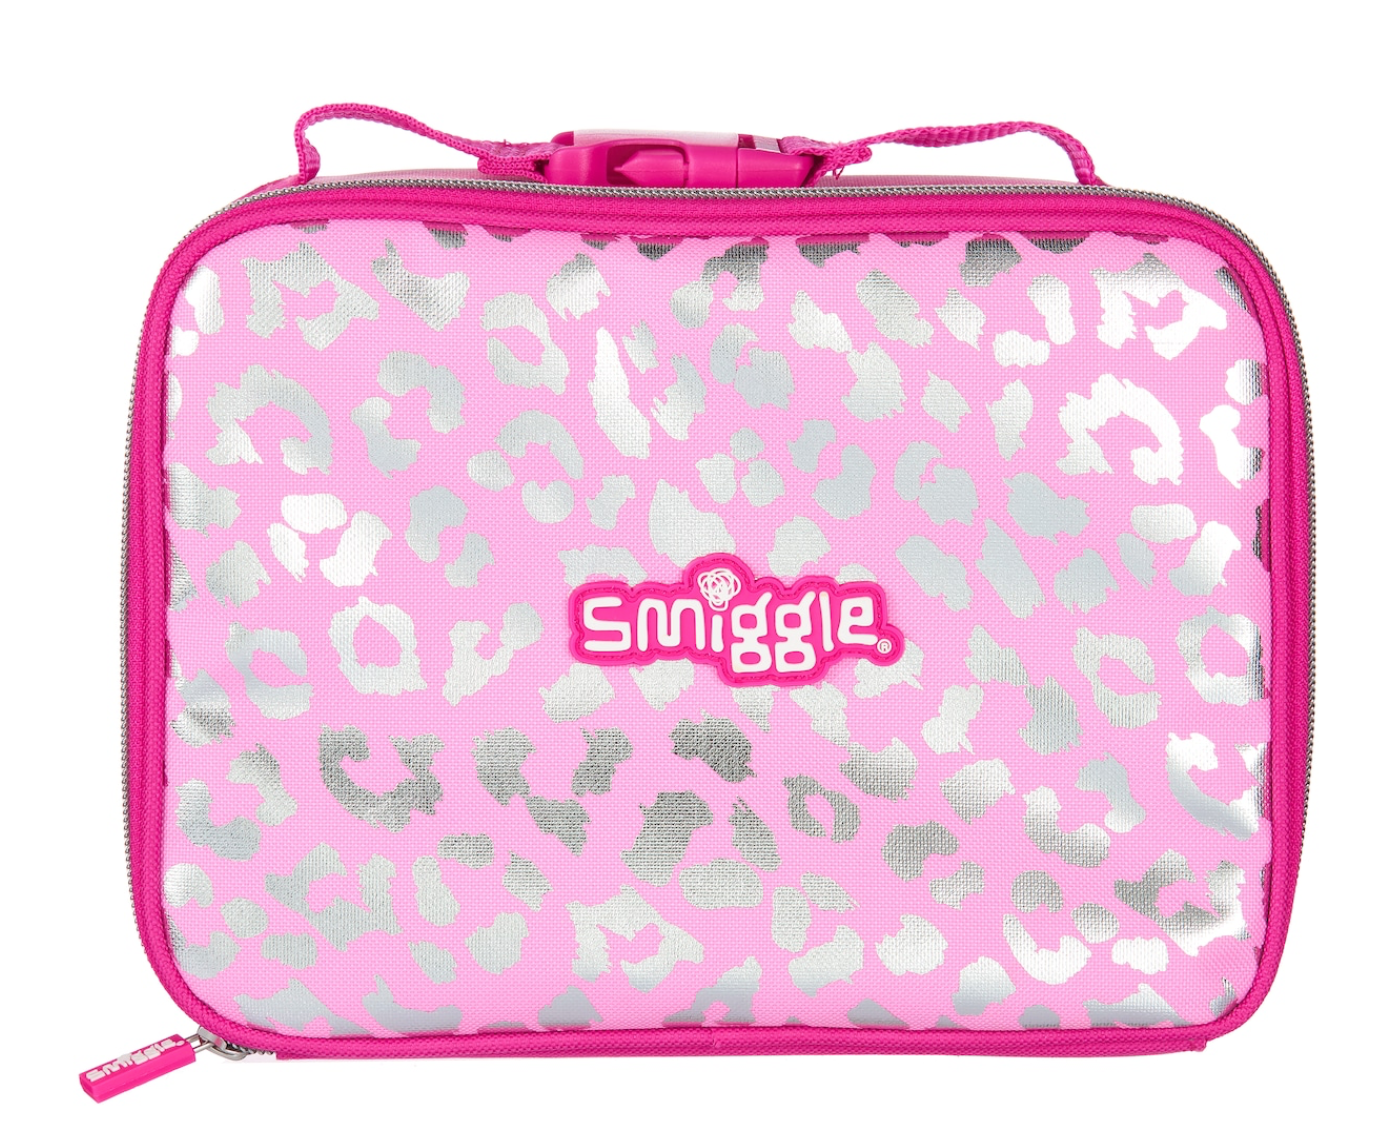 Smiggle, Purveyor of $40 School Lunchboxes, Considers Spin Off - Bloomberg